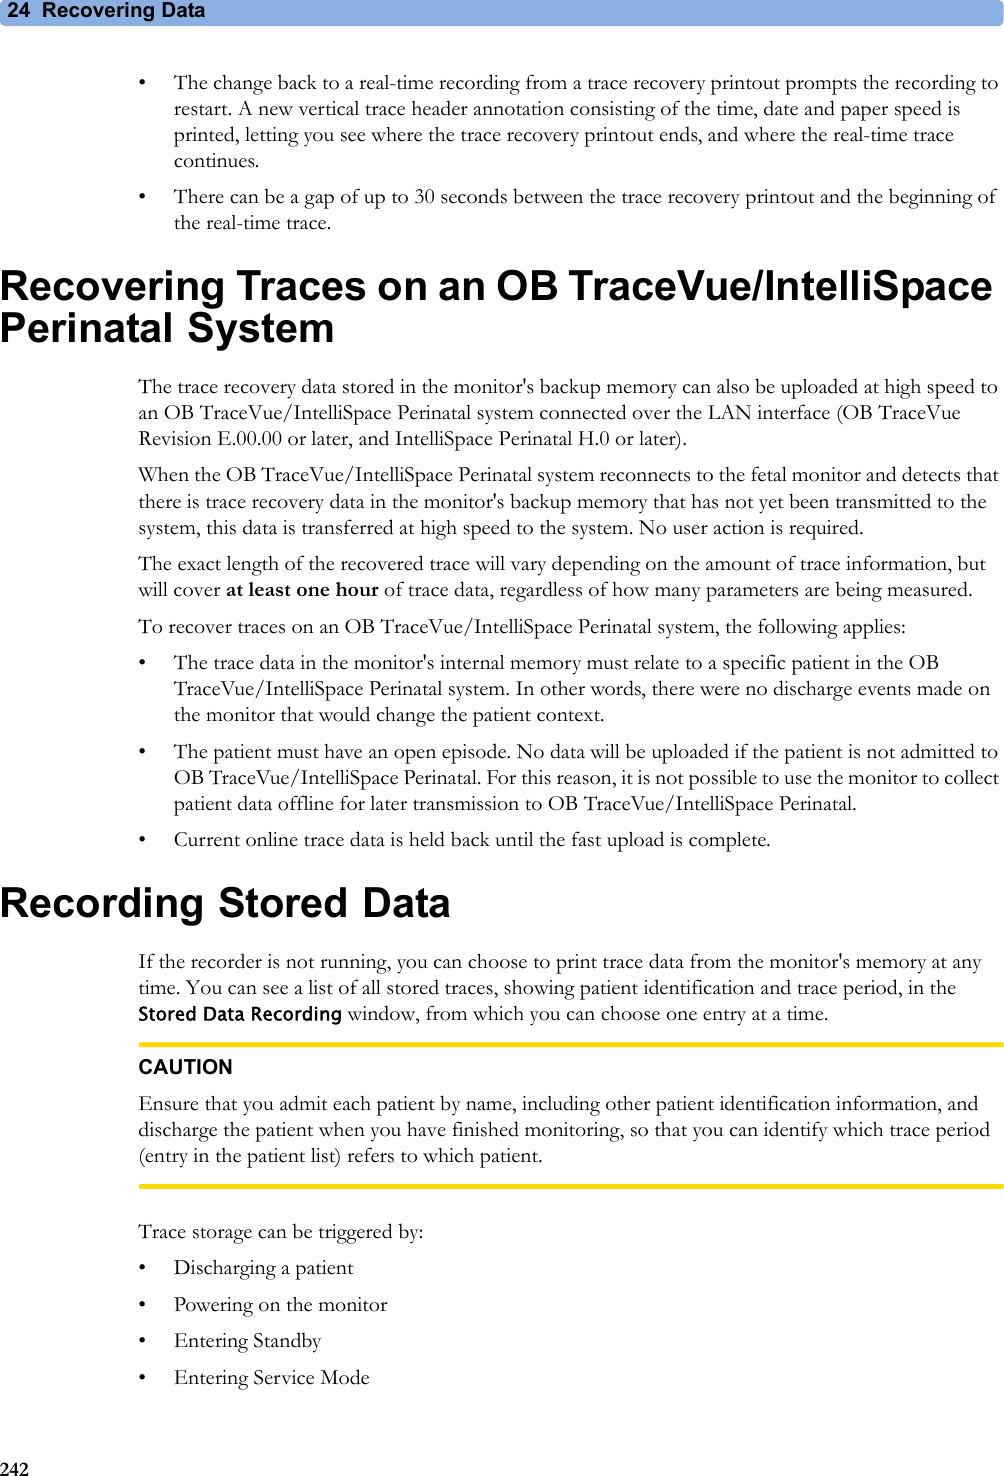 24 Recovering Data242• The change back to a real-time recording from a trace recovery printout prompts the recording to restart. A new vertical trace header annotation consisting of the time, date and paper speed is printed, letting you see where the trace recovery printout ends, and where the real-time trace continues.• There can be a gap of up to 30 seconds between the trace recovery printout and the beginning of the real-time trace.Recovering Traces on an OB TraceVue/IntelliSpace Perinatal SystemThe trace recovery data stored in the monitor&apos;s backup memory can also be uploaded at high speed to an OB TraceVue/IntelliSpace Perinatal system connected over the LAN interface (OB TraceVue Revision E.00.00 or later, and IntelliSpace Perinatal H.0 or later).When the OB TraceVue/IntelliSpace Perinatal system reconnects to the fetal monitor and detects that there is trace recovery data in the monitor&apos;s backup memory that has not yet been transmitted to the system, this data is transferred at high speed to the system. No user action is required.The exact length of the recovered trace will vary depending on the amount of trace information, but will cover at least one hour of trace data, regardless of how many parameters are being measured.To recover traces on an OB TraceVue/IntelliSpace Perinatal system, the following applies:• The trace data in the monitor&apos;s internal memory must relate to a specific patient in the OB TraceVue/IntelliSpace Perinatal system. In other words, there were no discharge events made on the monitor that would change the patient context.• The patient must have an open episode. No data will be uploaded if the patient is not admitted to OB TraceVue/IntelliSpace Perinatal. For this reason, it is not possible to use the monitor to collect patient data offline for later transmission to OB TraceVue/IntelliSpace Perinatal.• Current online trace data is held back until the fast upload is complete.Recording Stored DataIf the recorder is not running, you can choose to print trace data from the monitor&apos;s memory at any time. You can see a list of all stored traces, showing patient identification and trace period, in the Stored Data Recording window, from which you can choose one entry at a time.CAUTIONEnsure that you admit each patient by name, including other patient identification information, and discharge the patient when you have finished monitoring, so that you can identify which trace period (entry in the patient list) refers to which patient. Trace storage can be triggered by:• Discharging a patient• Powering on the monitor•Entering Standby• Entering Service Mode